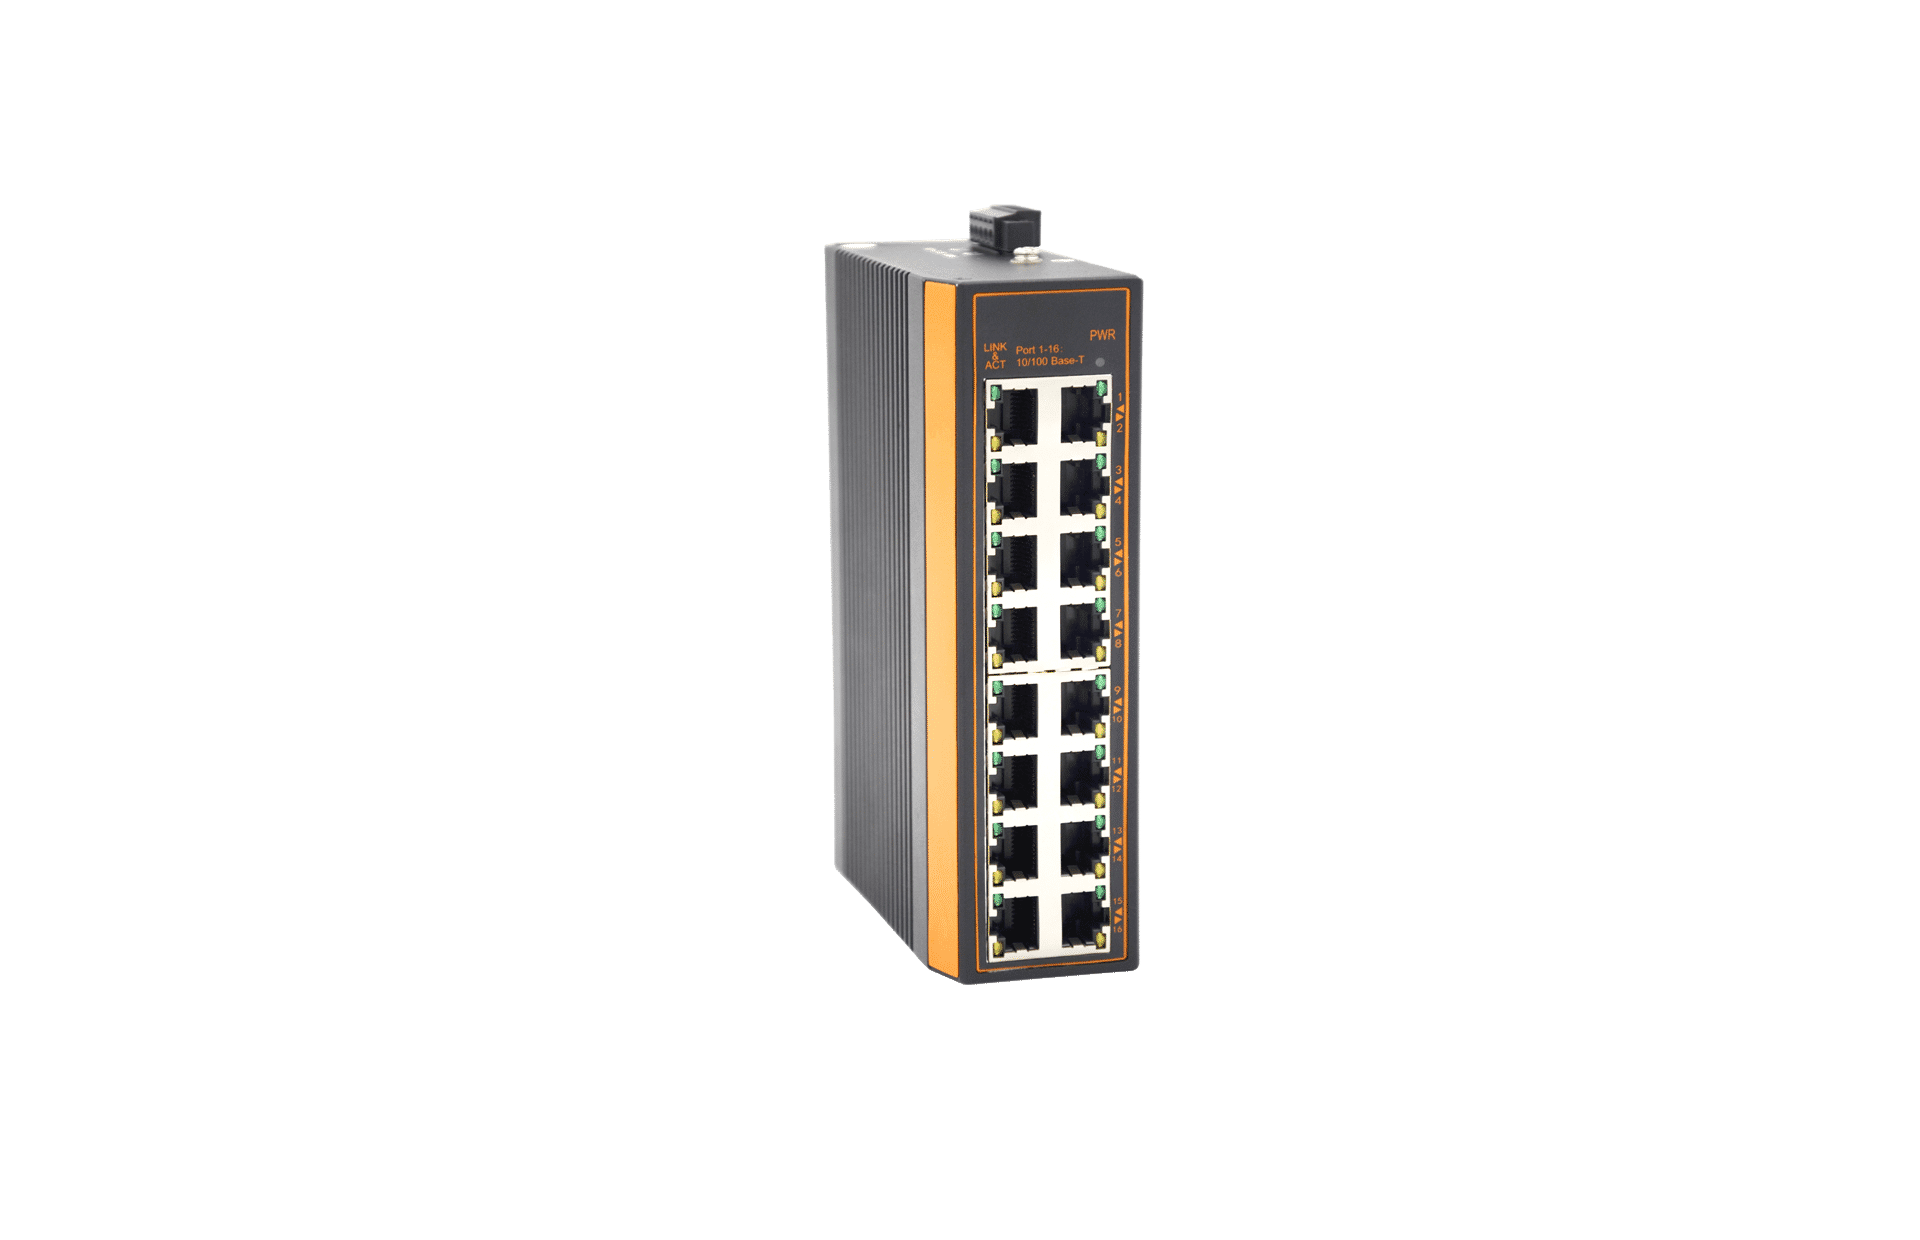 16 Ports 10/100Mbps Industrial Switch 